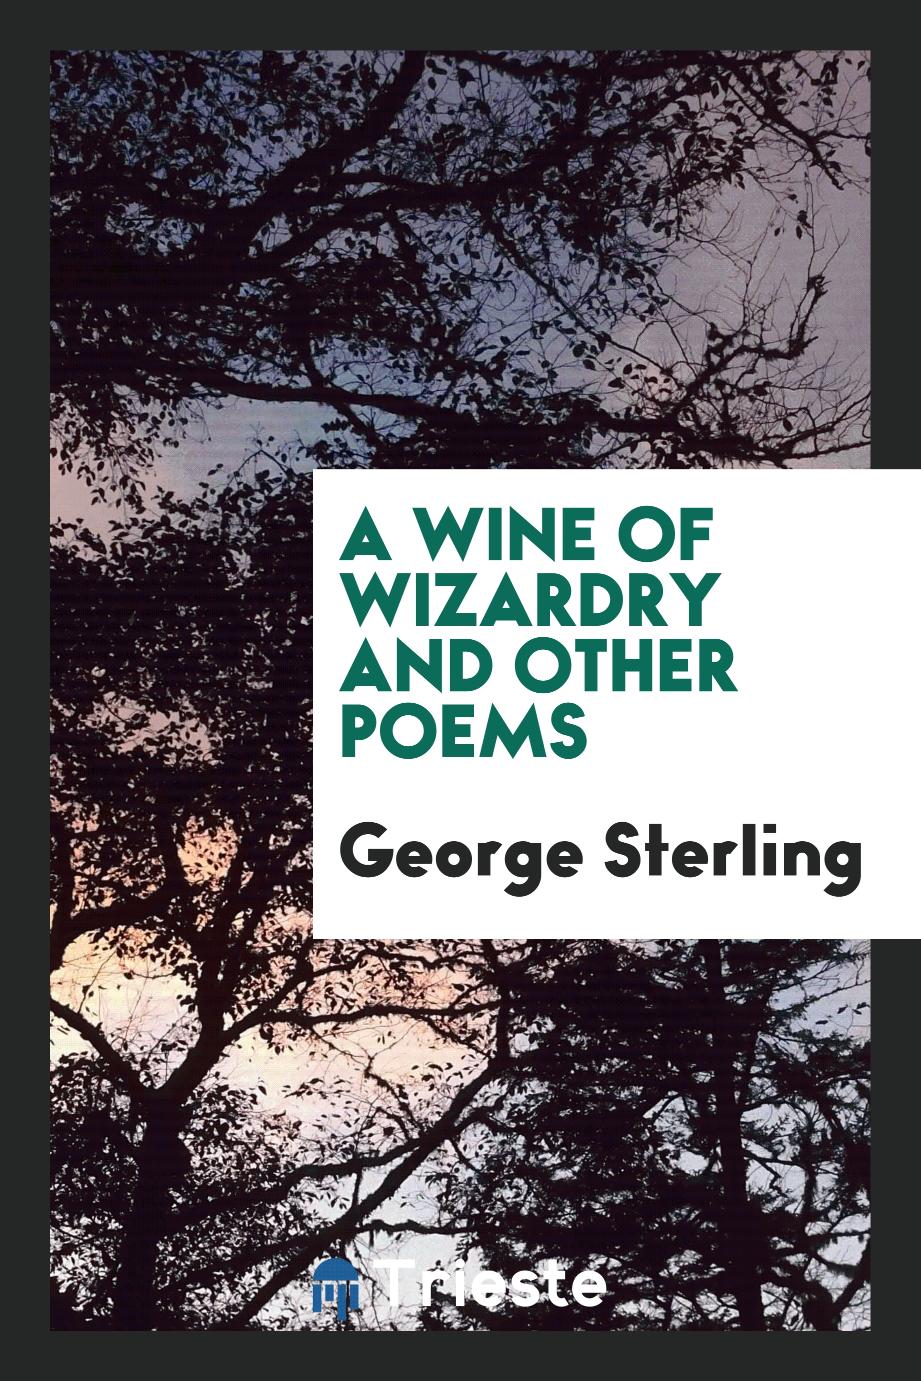 George Sterling - A wine of wizardry and other poems